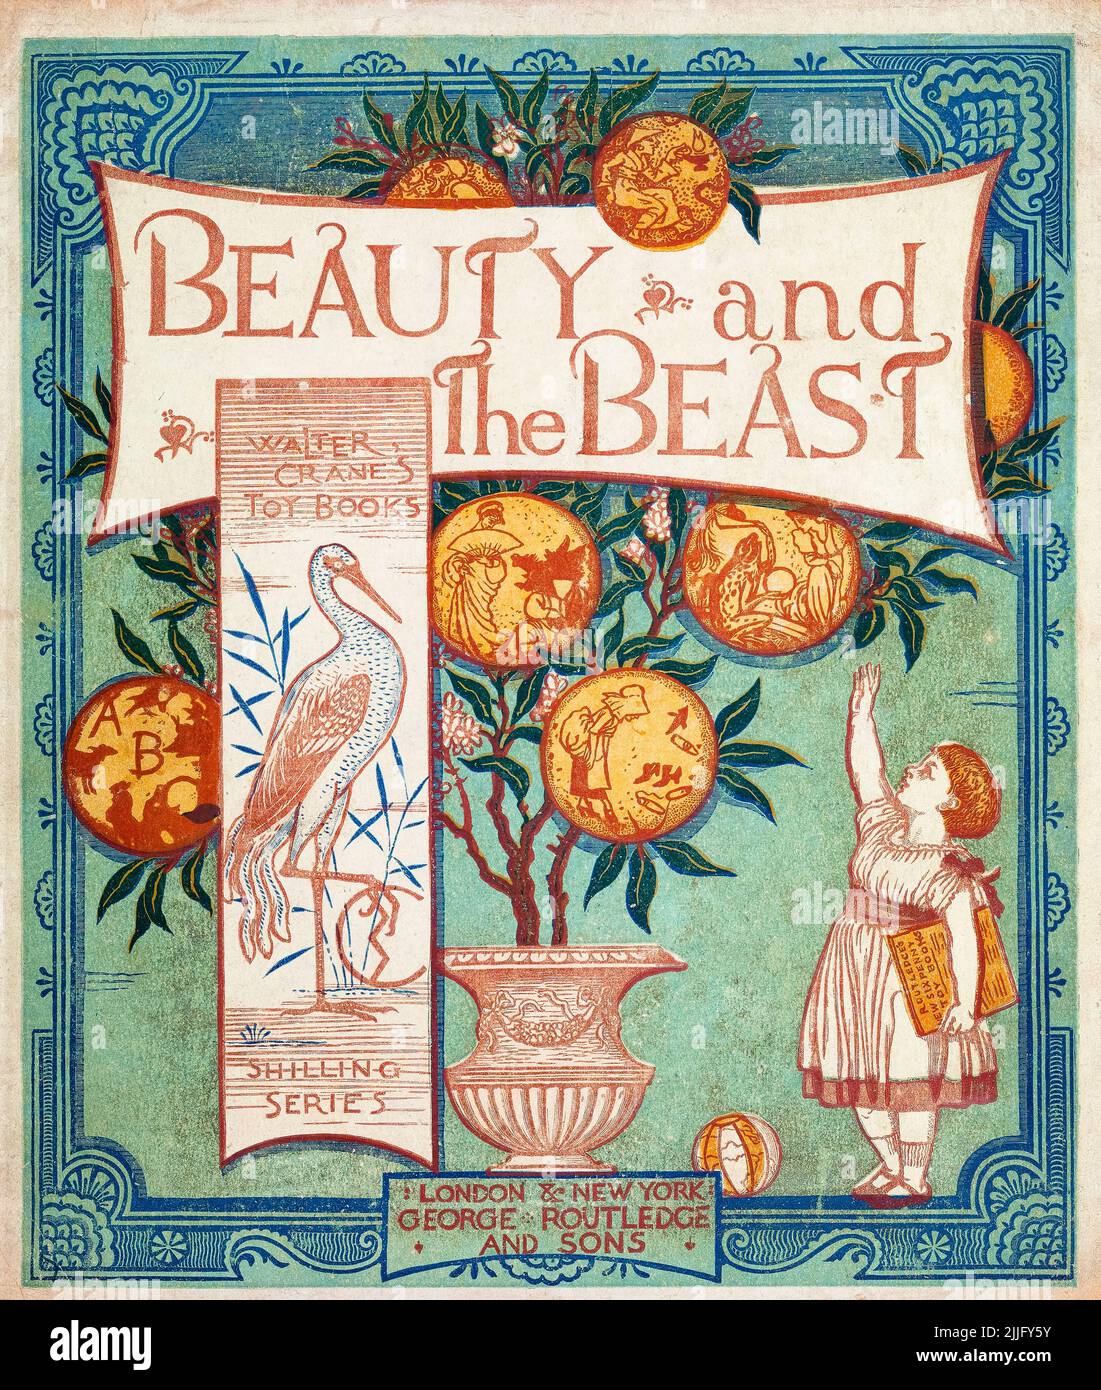 Beauty and The Beast, illustrated children's book, cover design illustration by Walter Crane, 1874-1875 Stock Photo